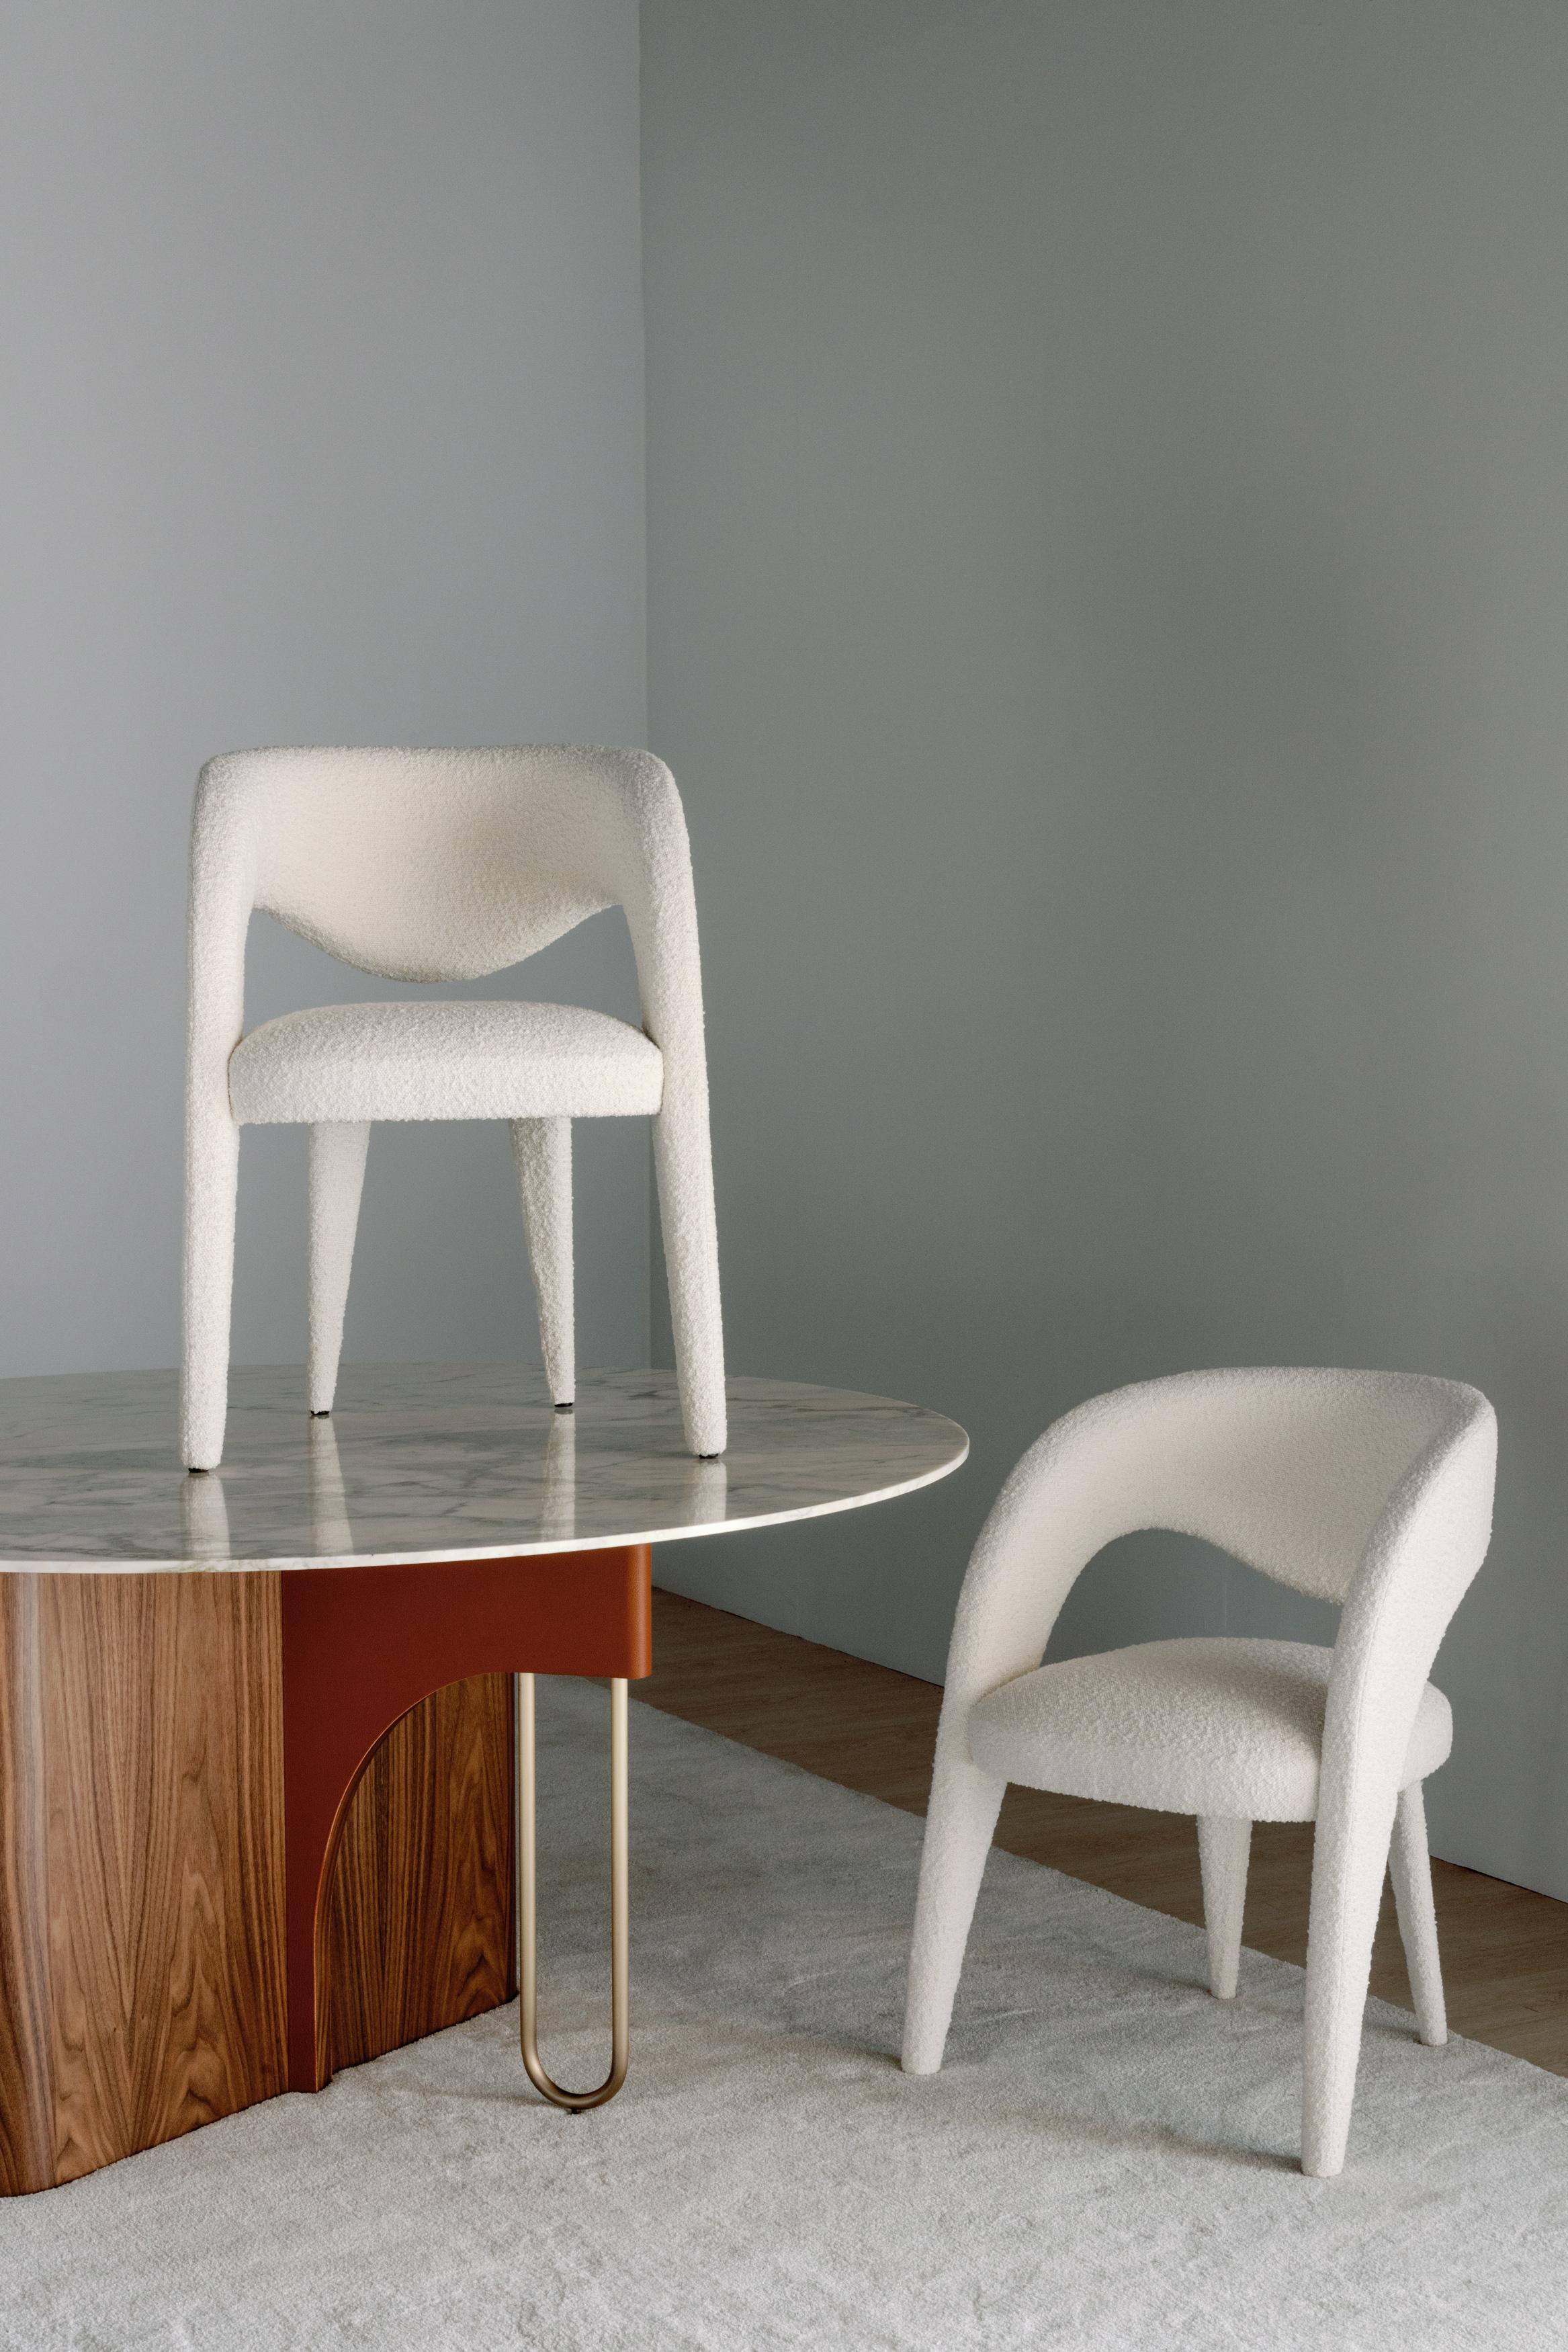 Laurence Chair, Contemporary Collection, Handcrafted in Portugal - Europe by Greenapple.

Designed by Rute Martins for the Contemporary Collection, the Laurence bouclé dining chair was created with the artistic intent of reimagining the image of